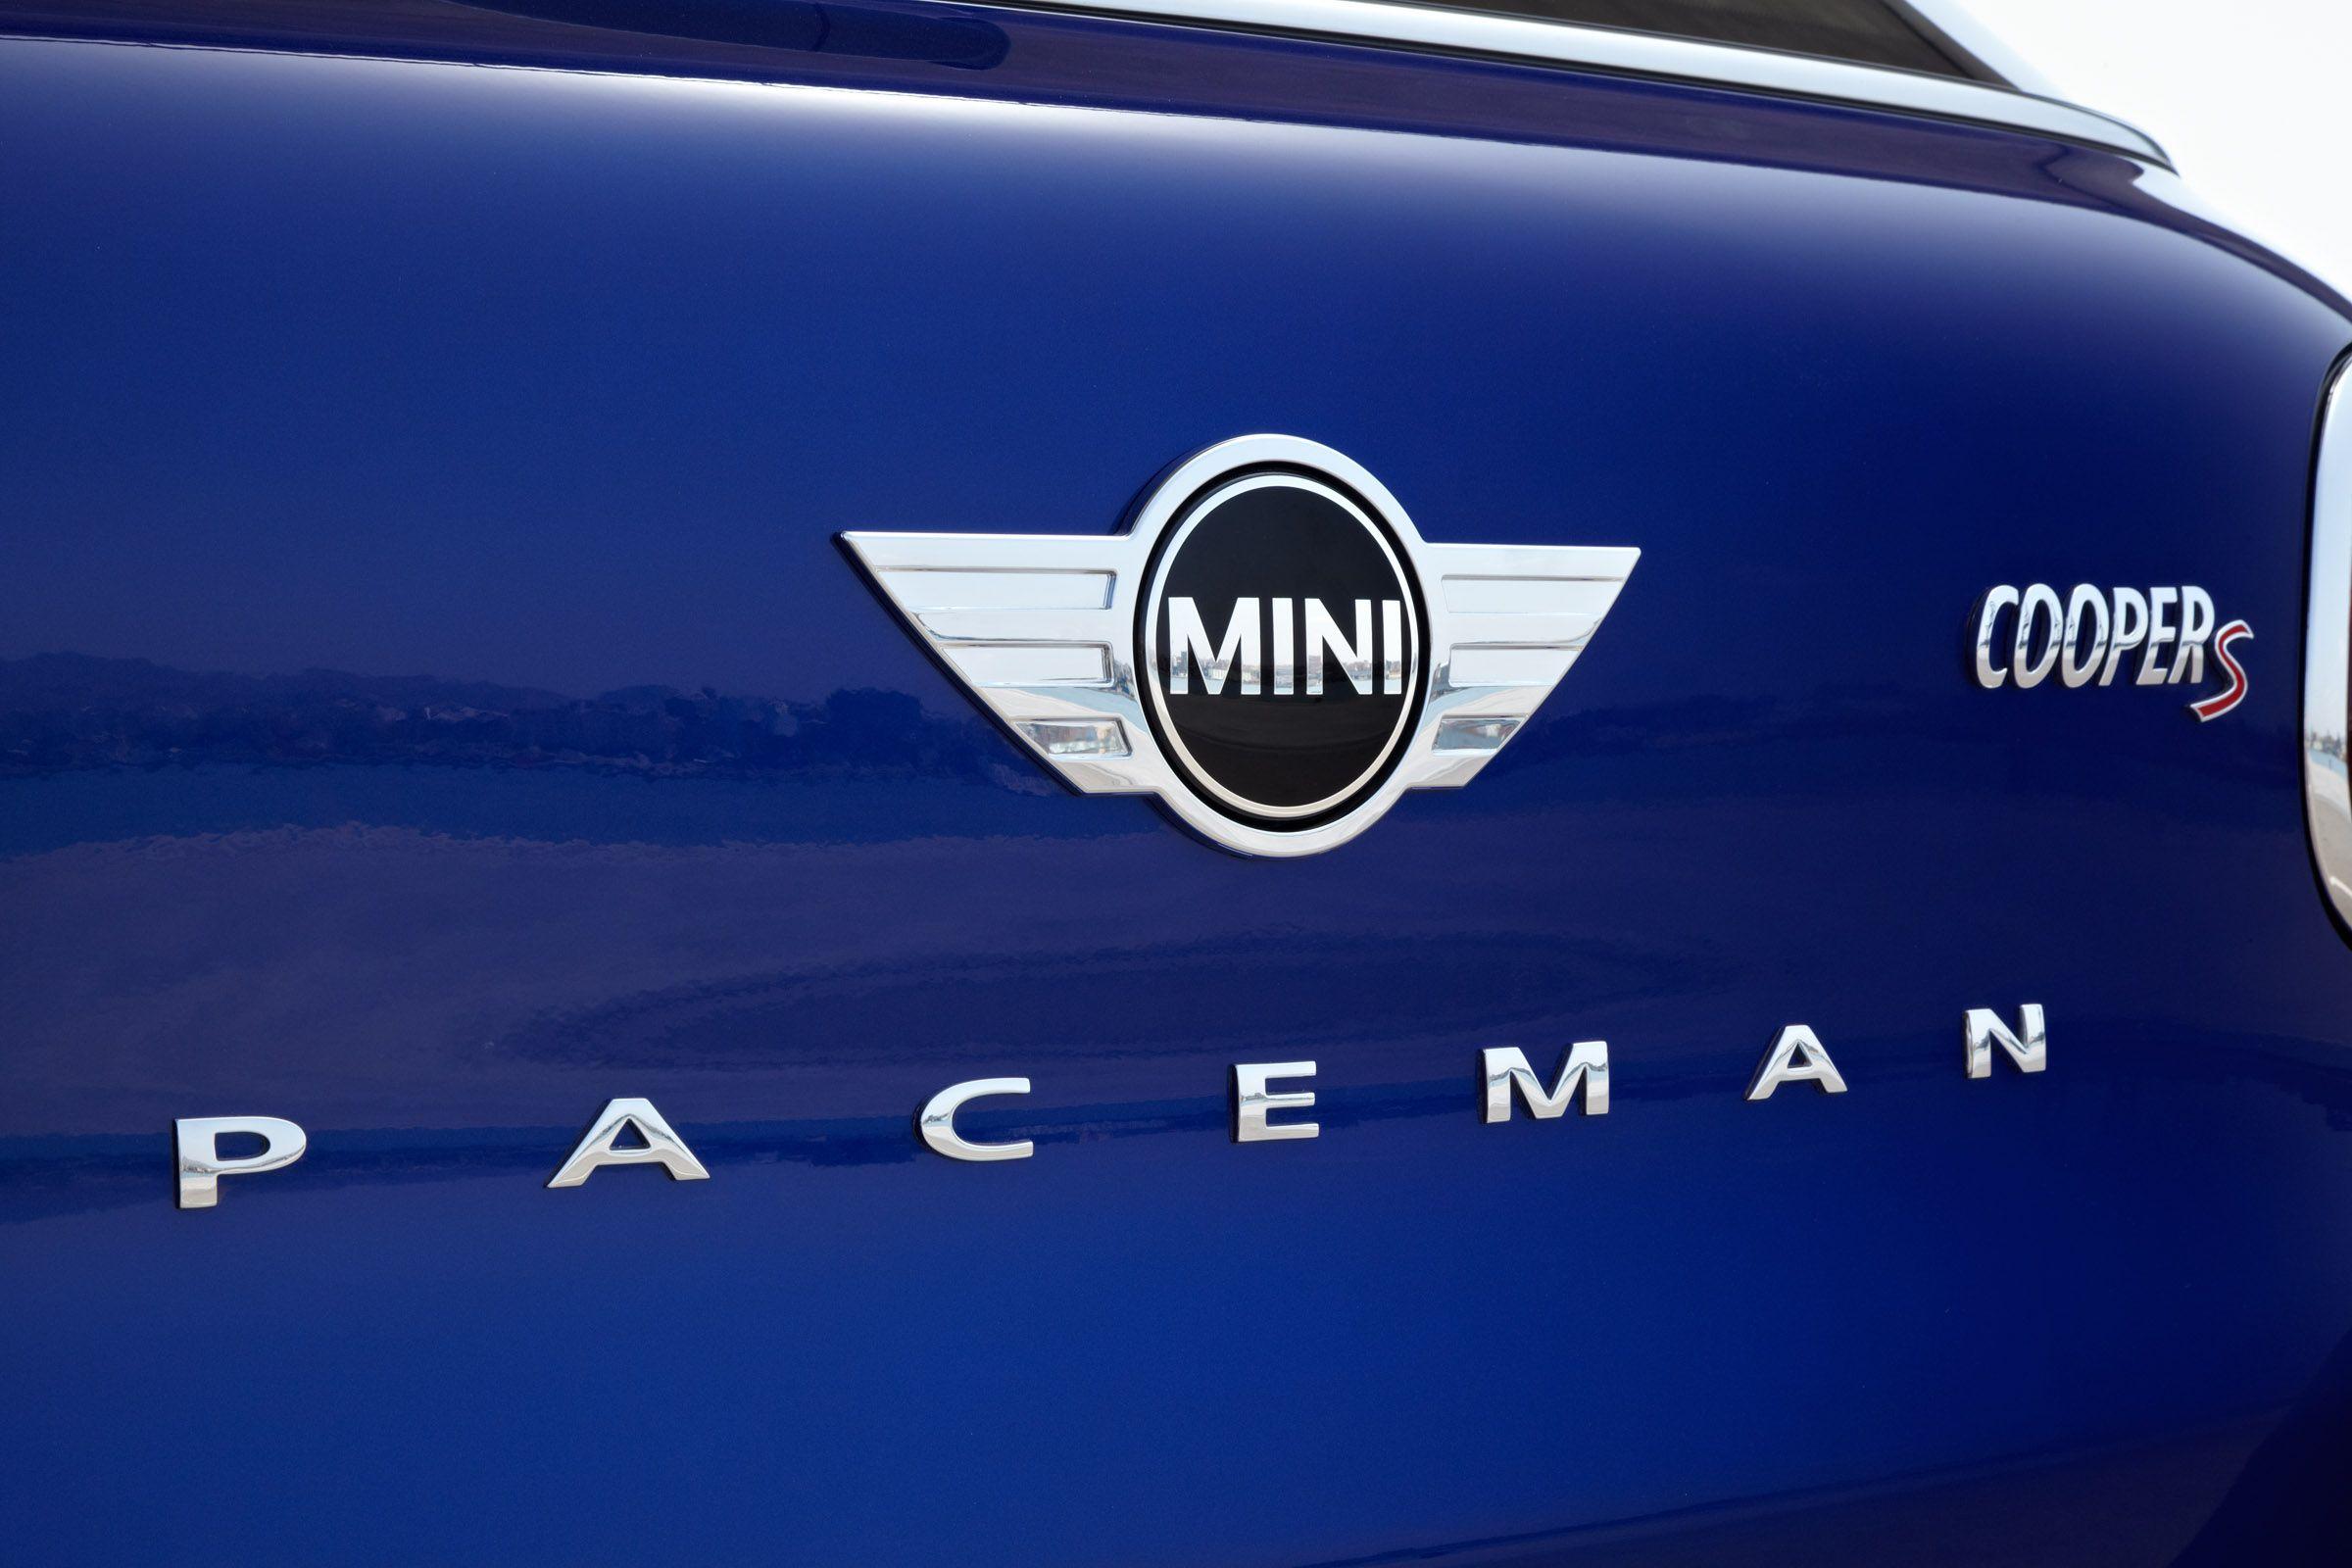 Mini Cooper Car Logo - Mini Cooper Logo, Mini Car Symbol Meaning and History | Car Brand ...